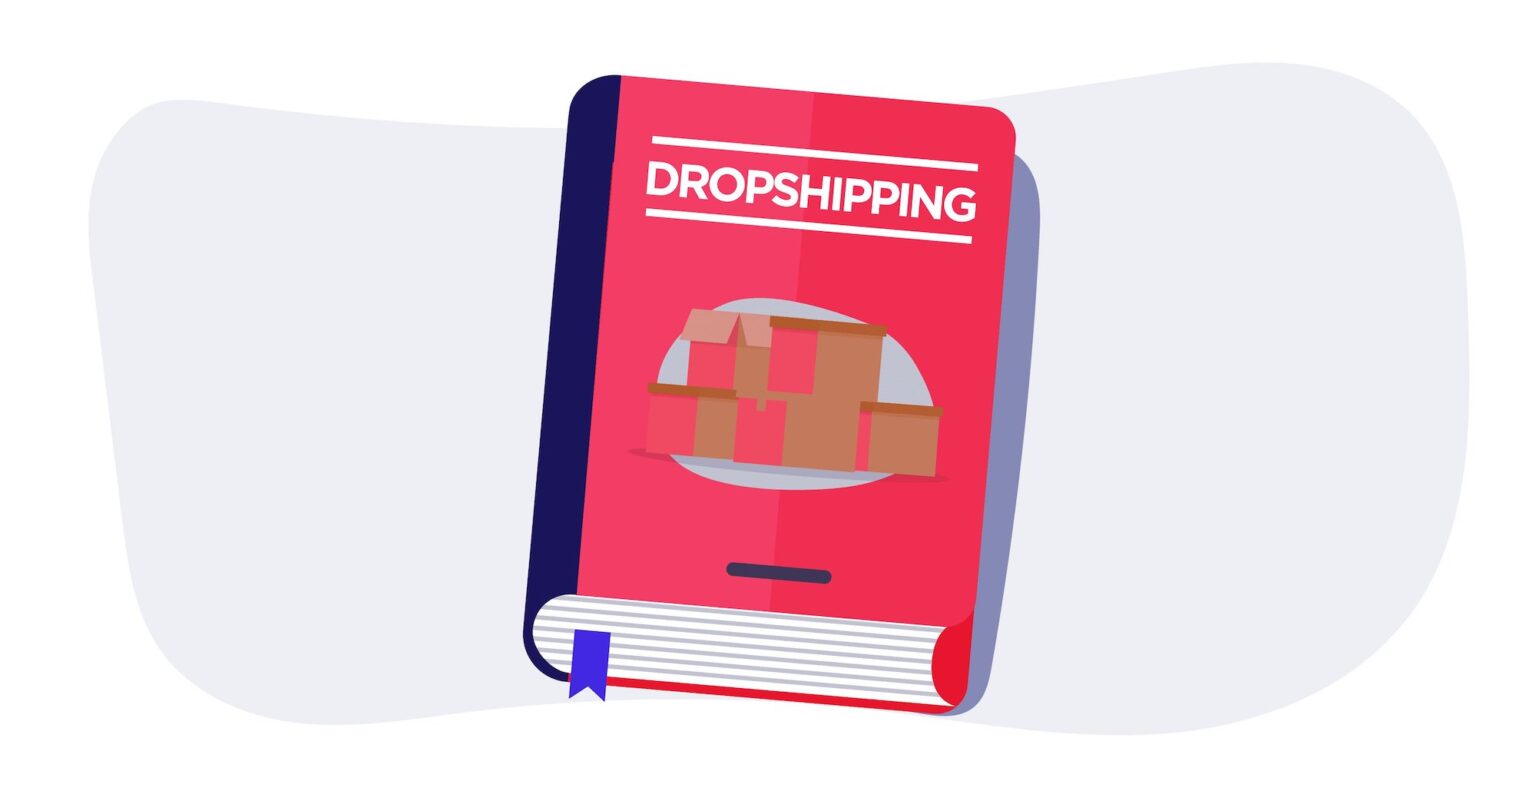 Dropshipping is a popular method of making money online, and here are some tips on using impressive e-commerce designs for your dropshipping store.